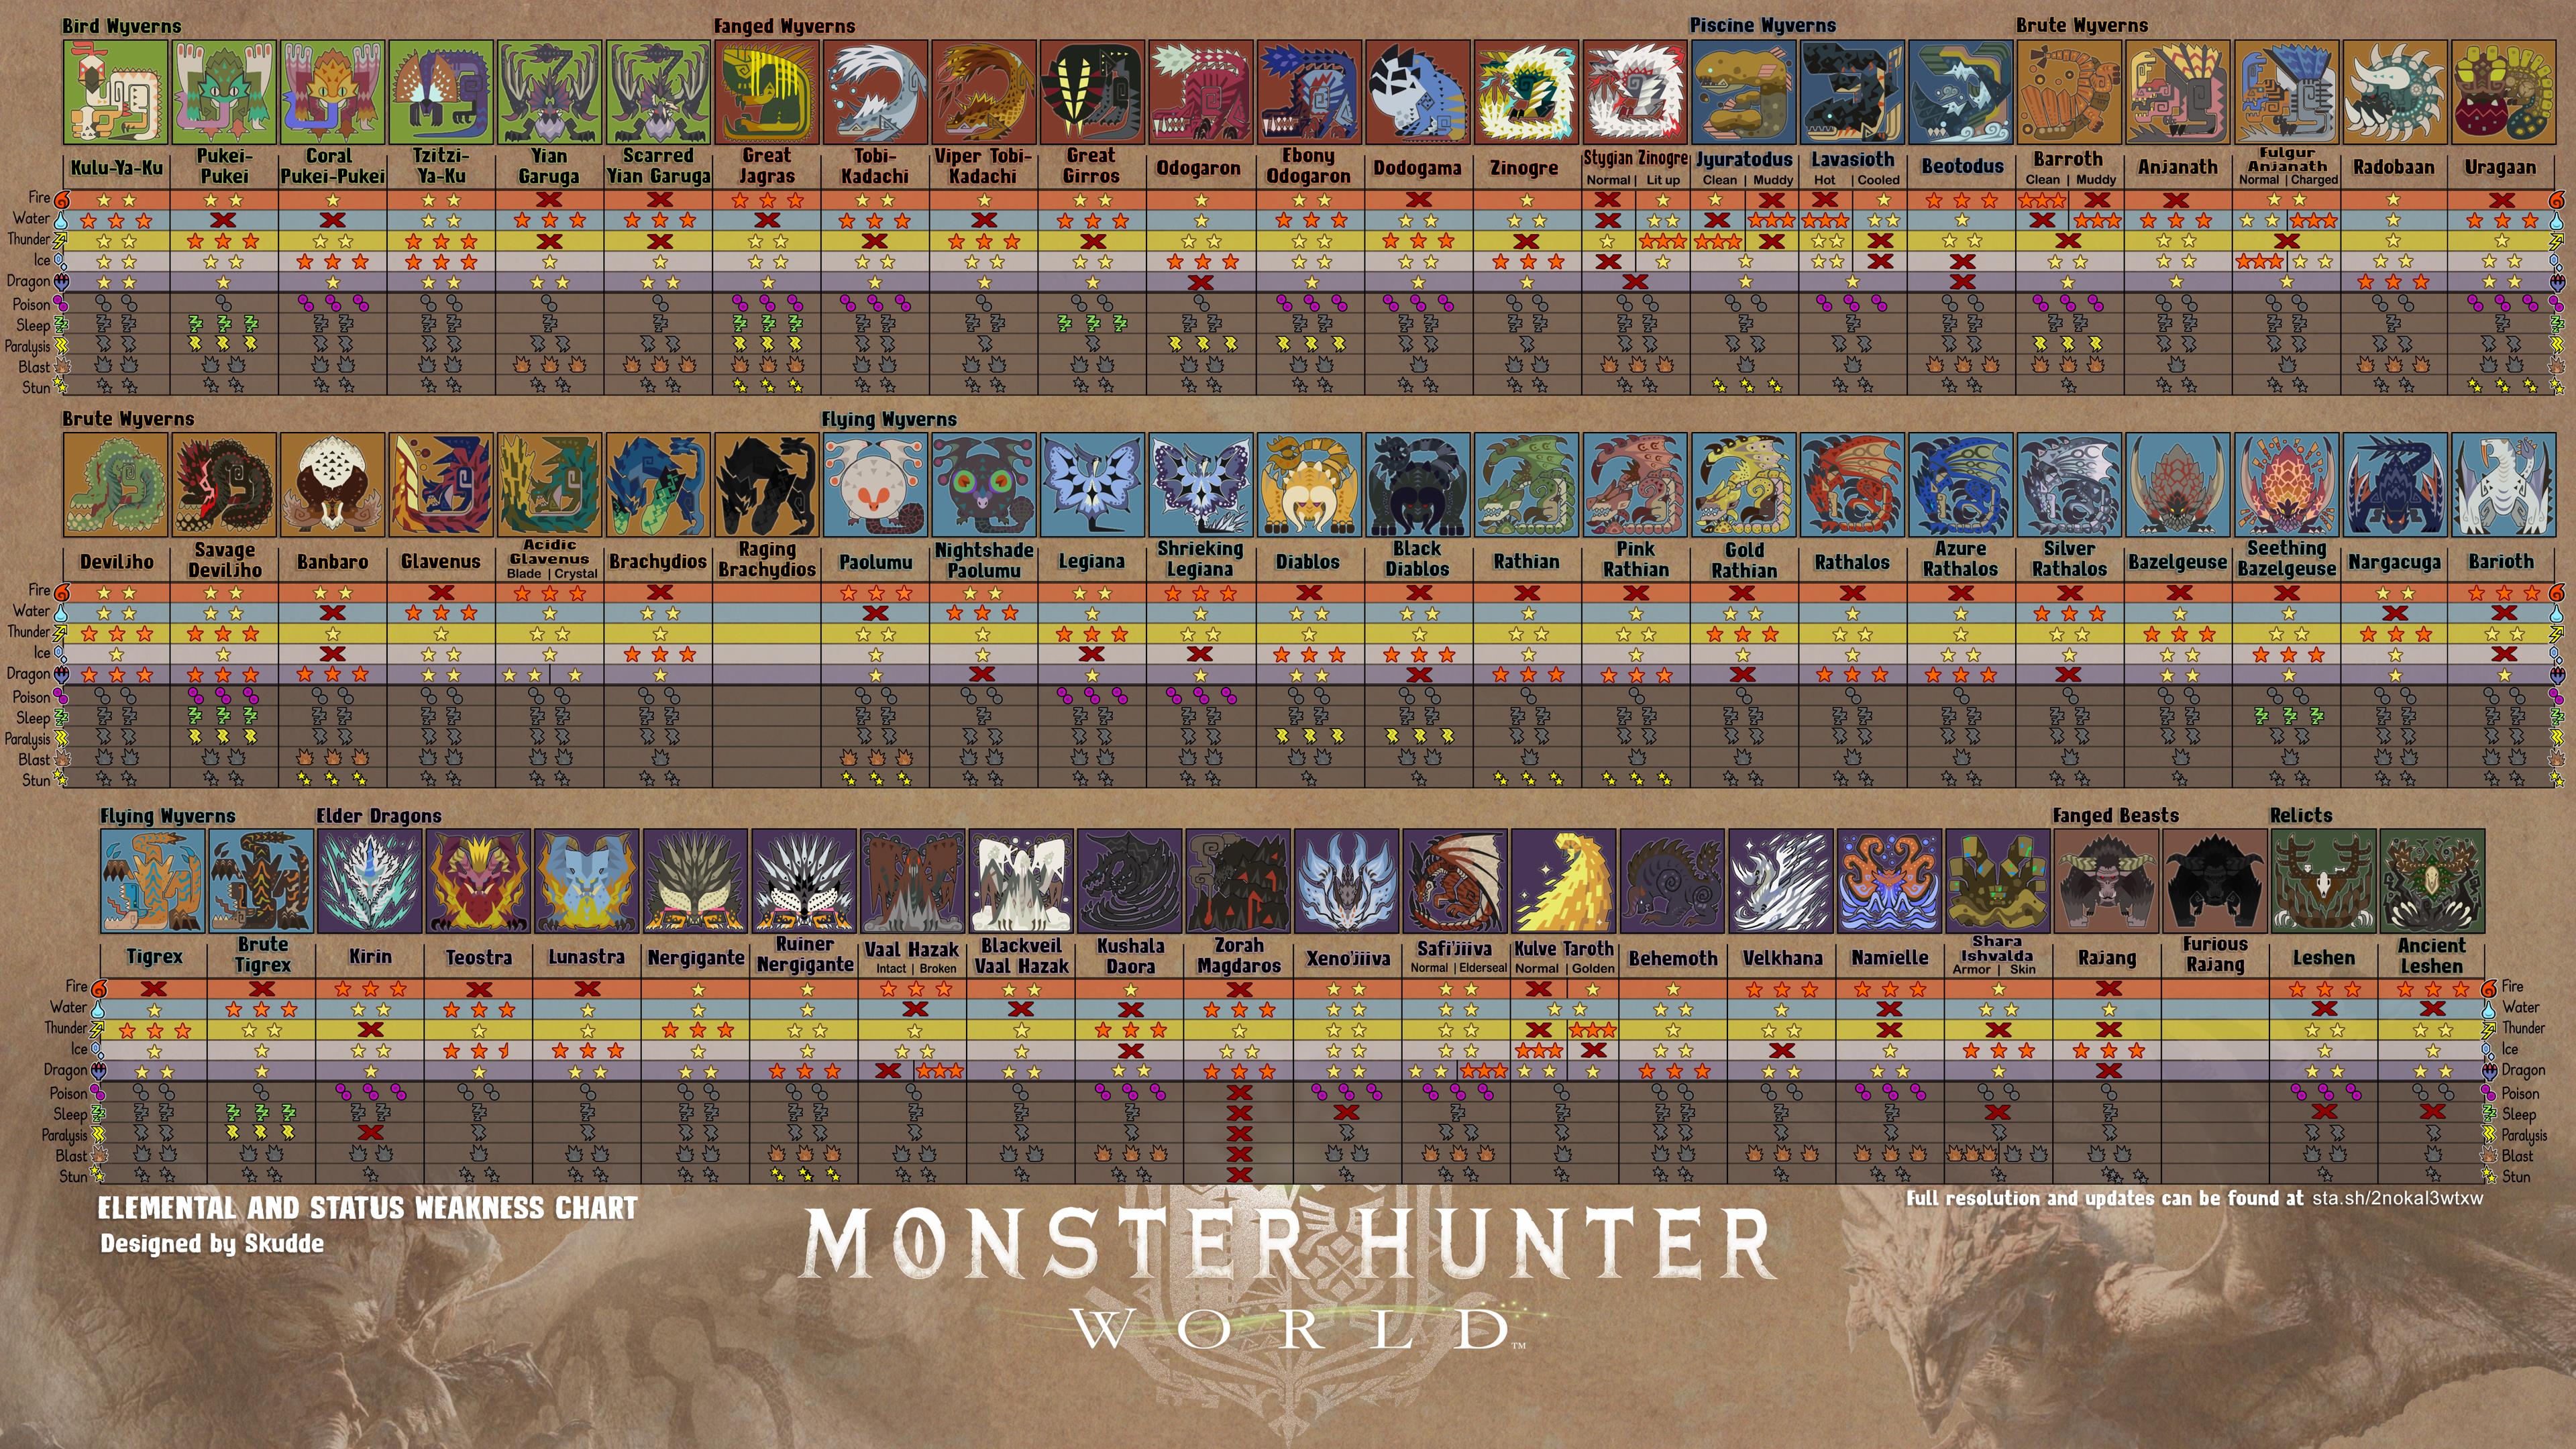 Elemental and Status Weakness chart by Skudde. 